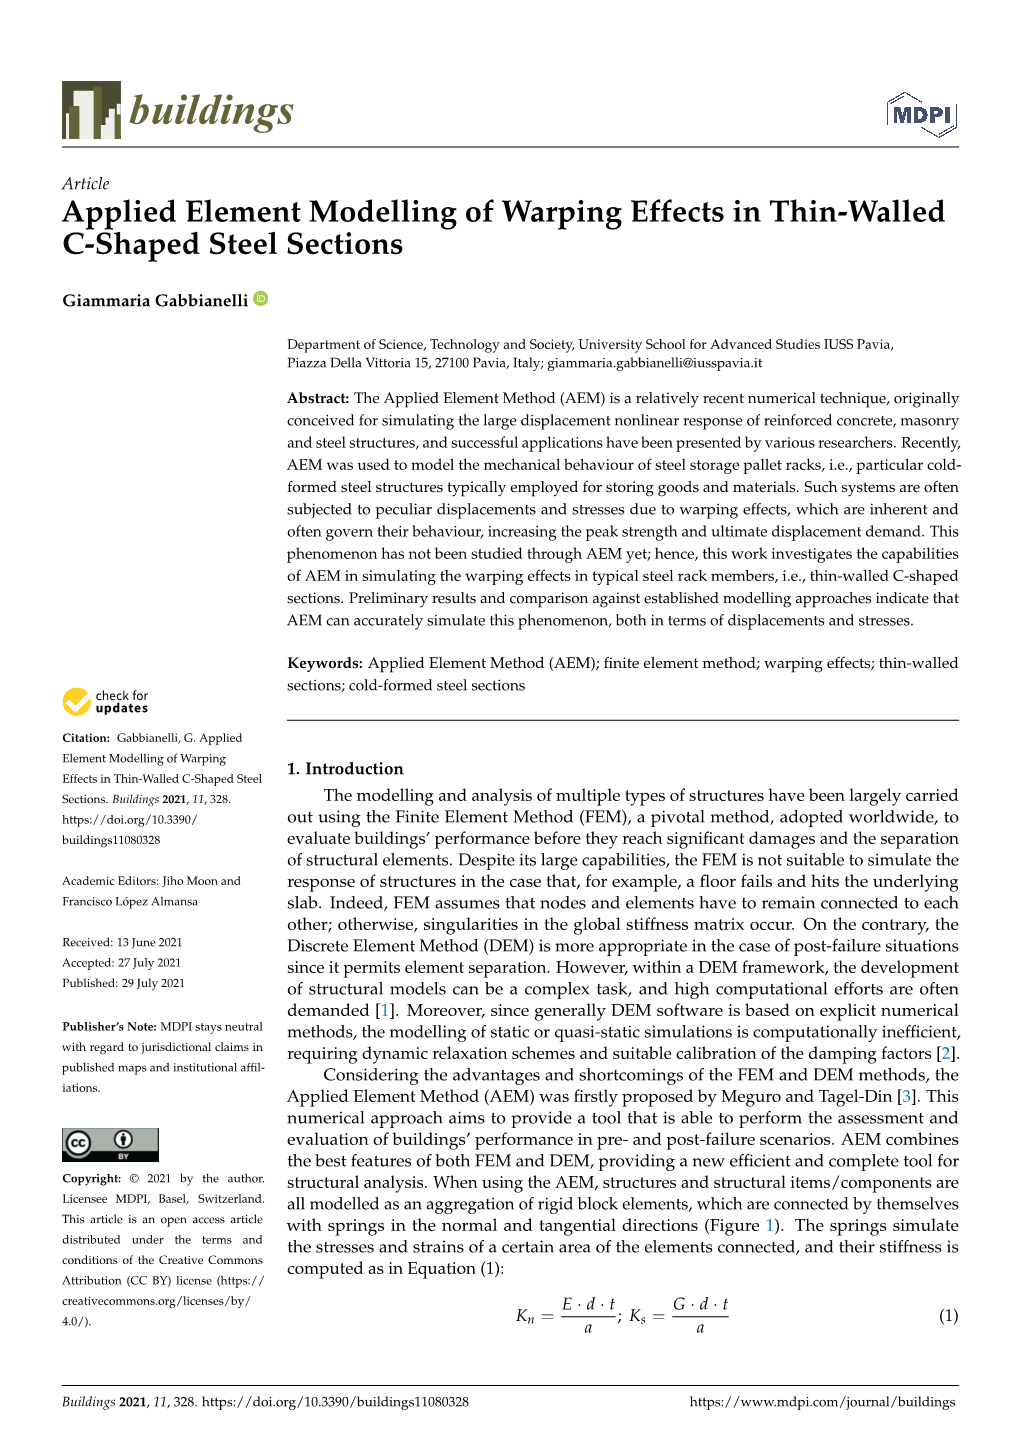 Applied Element Modelling of Warping Effects in Thin-Walled C-Shaped Steel Sections